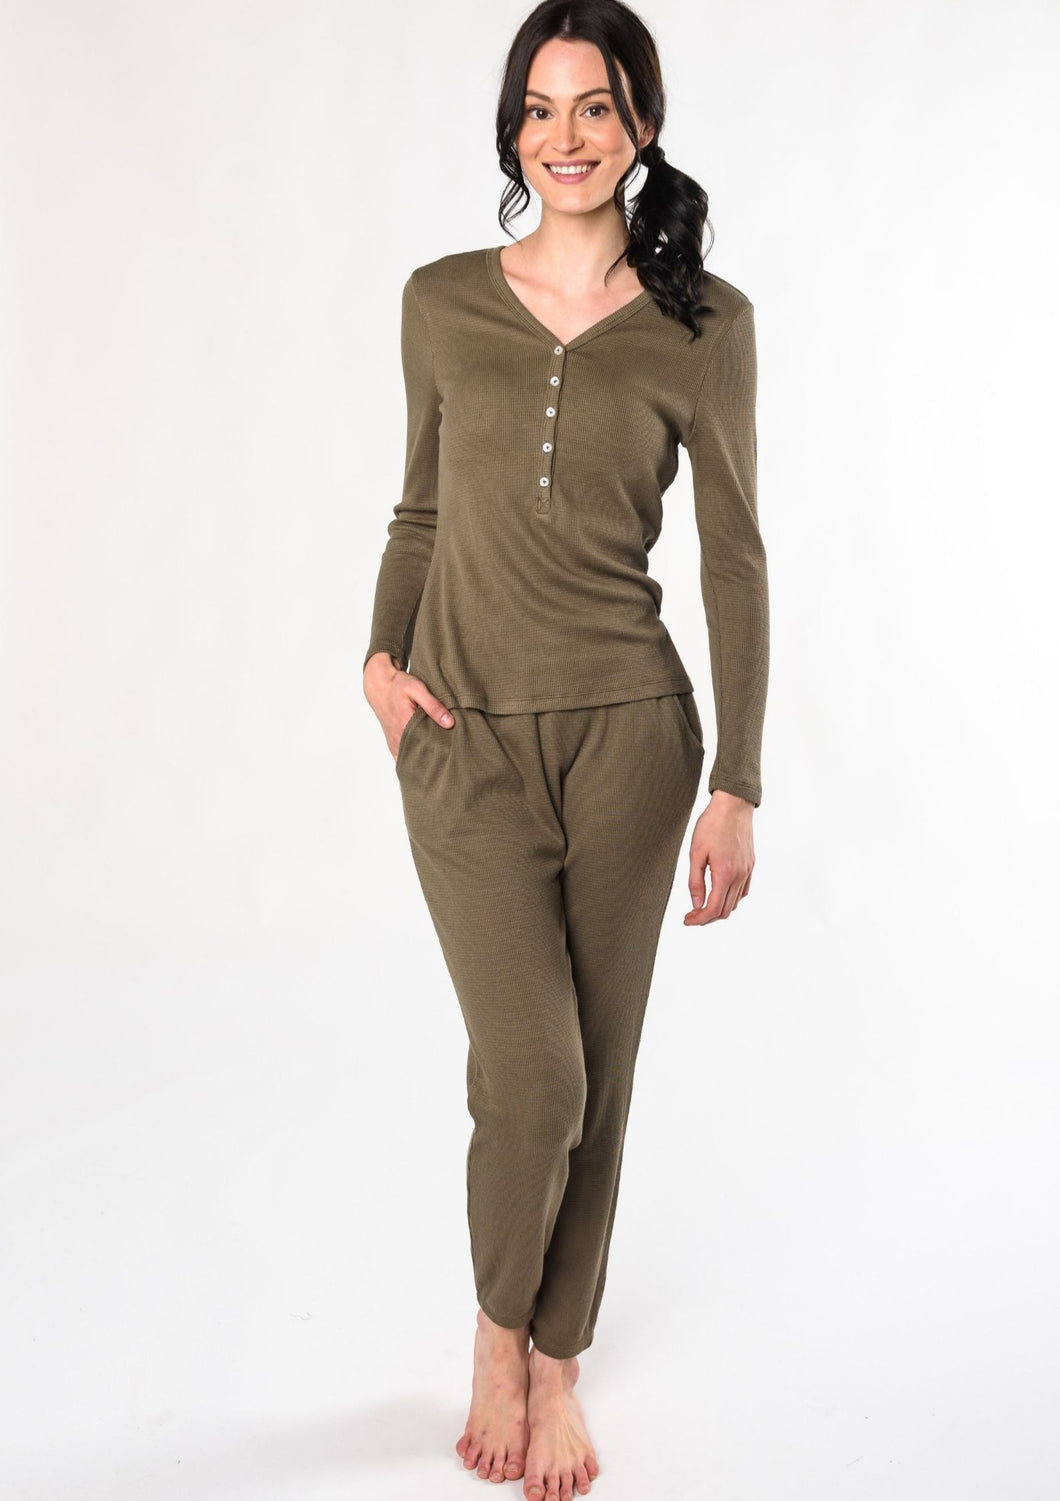 Featuring our new sustainable waffle fabric that’s ultra-comfortable and cozy to lounge in. This set comes with a stretchy and soft waffle henley top and matching pull-on bottoms. Fabrication: 68% Viscose from bamboo, 28% cotton 4% spandex $135.00 moss green